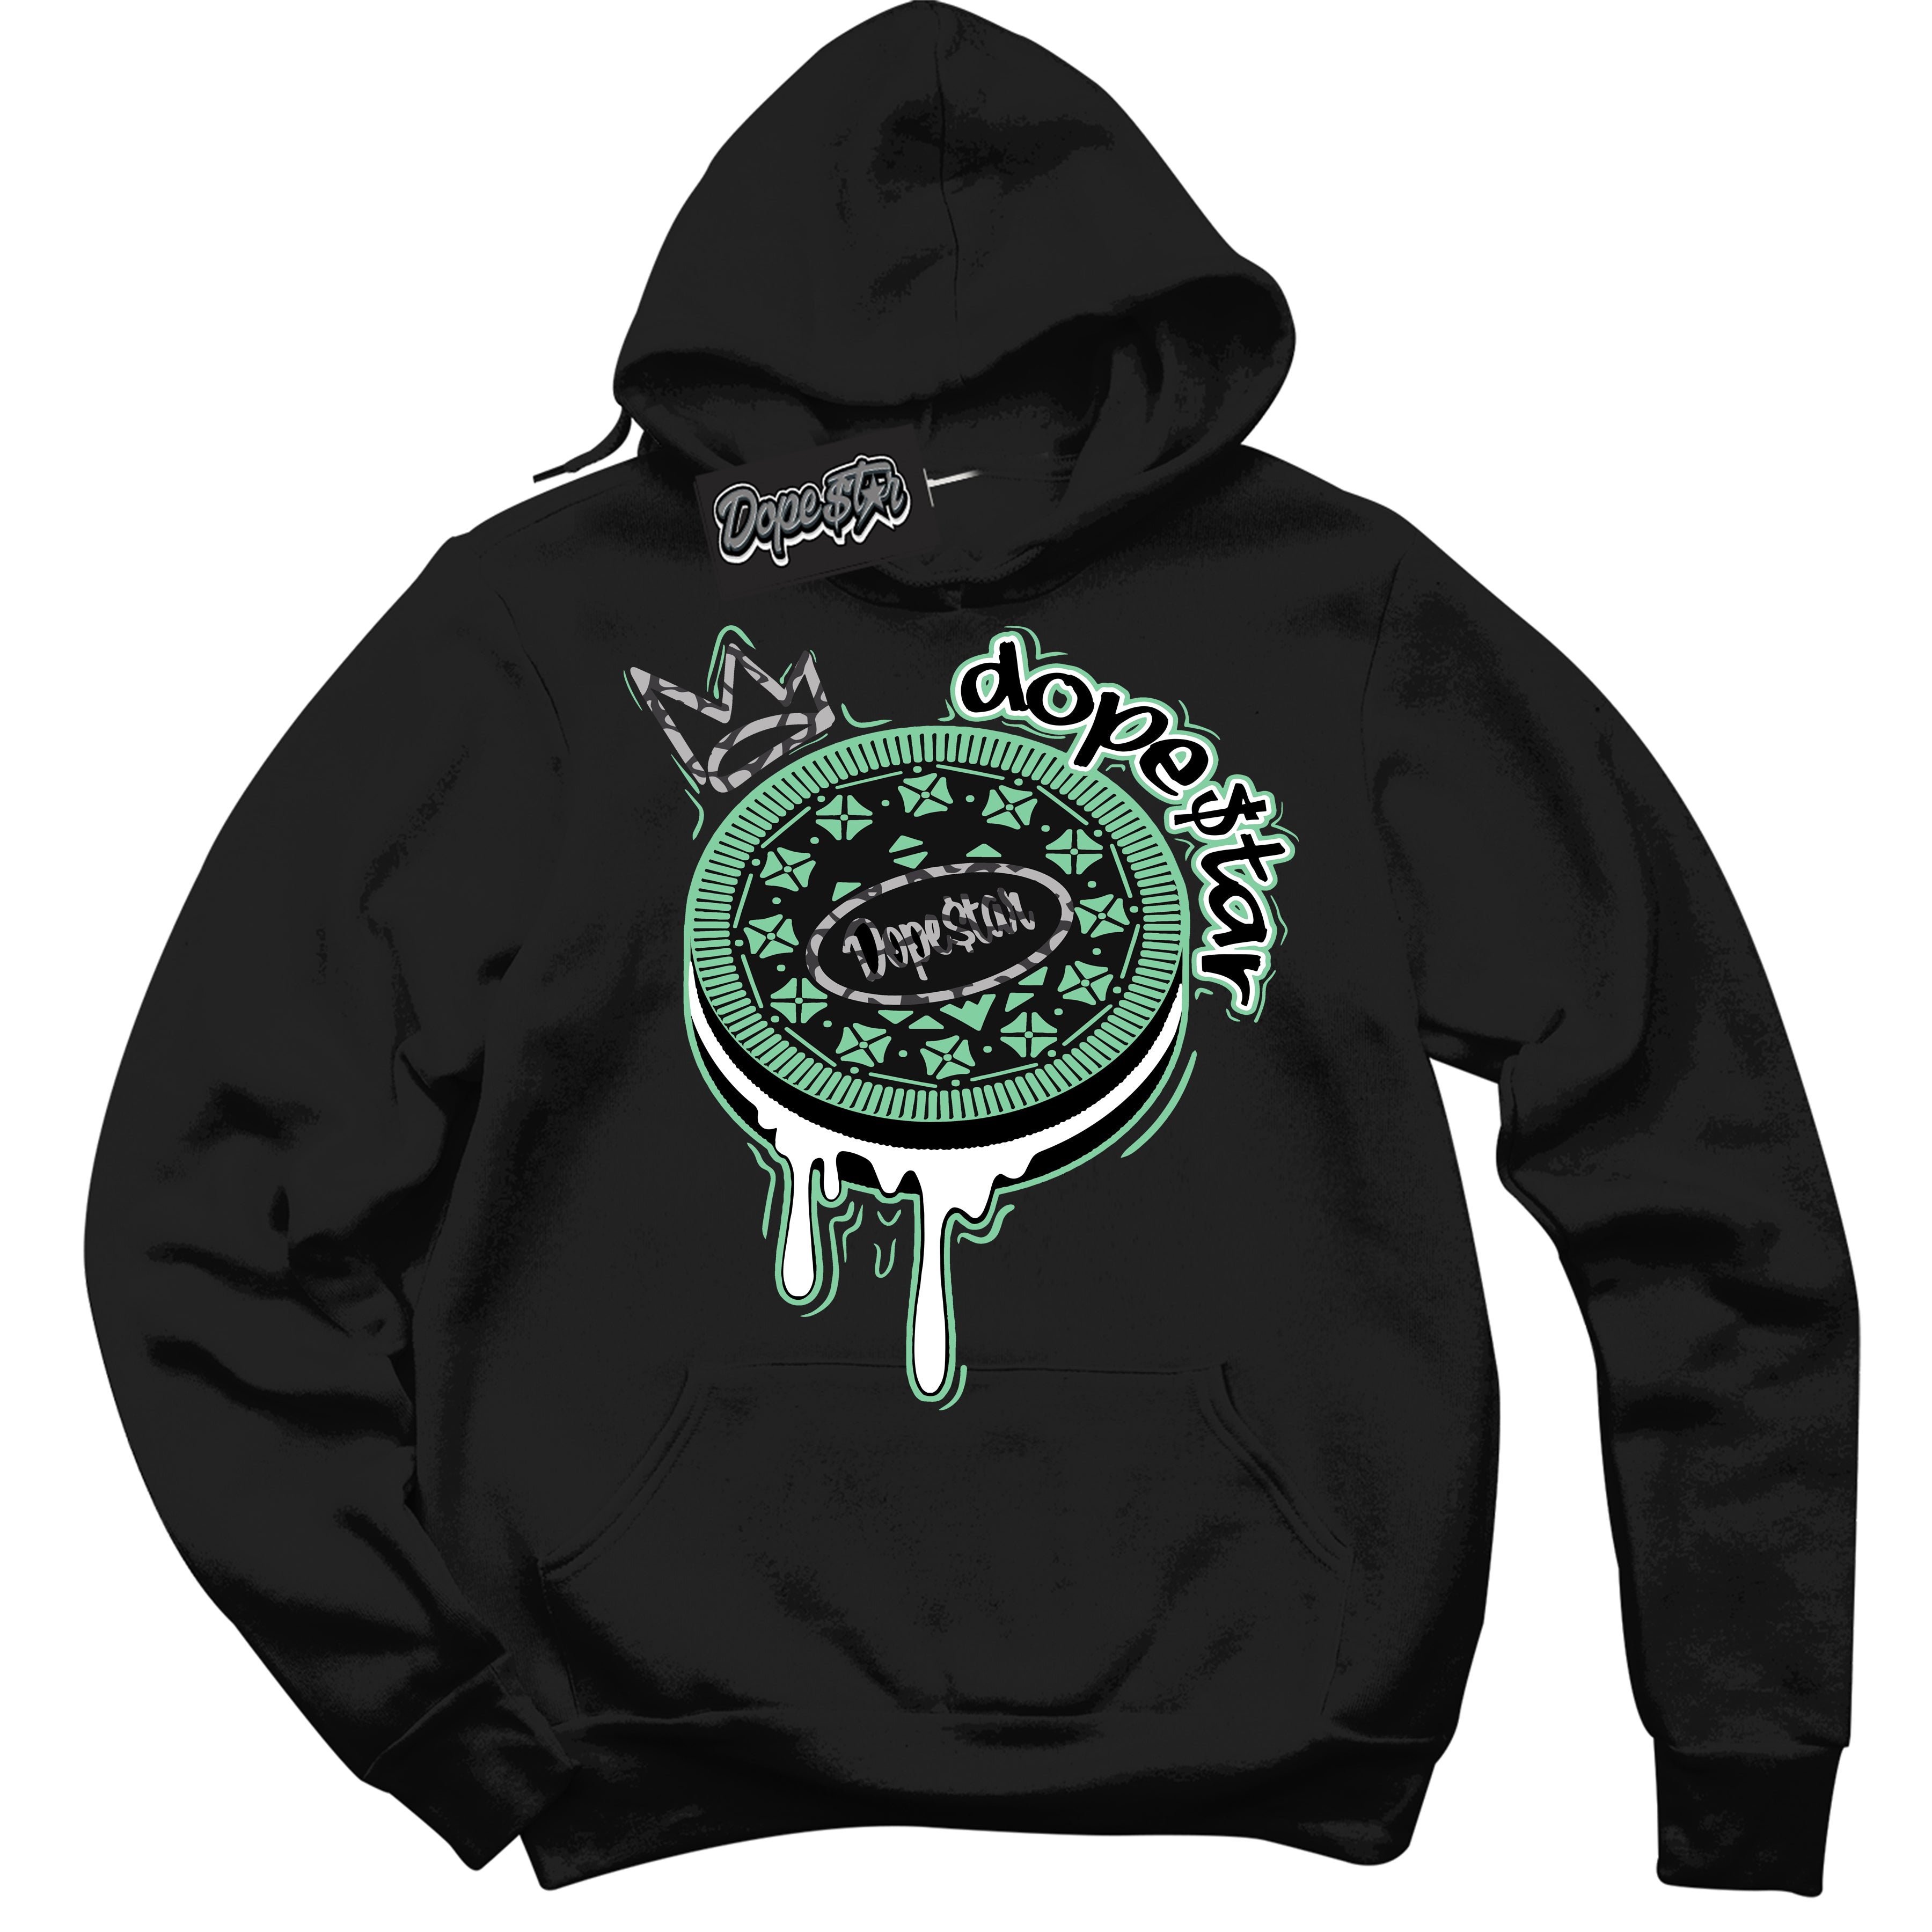 Cool Black Graphic DopeStar Hoodie with “ Oreo DS “ print, that perfectly matches Green Glow 3S sneakers